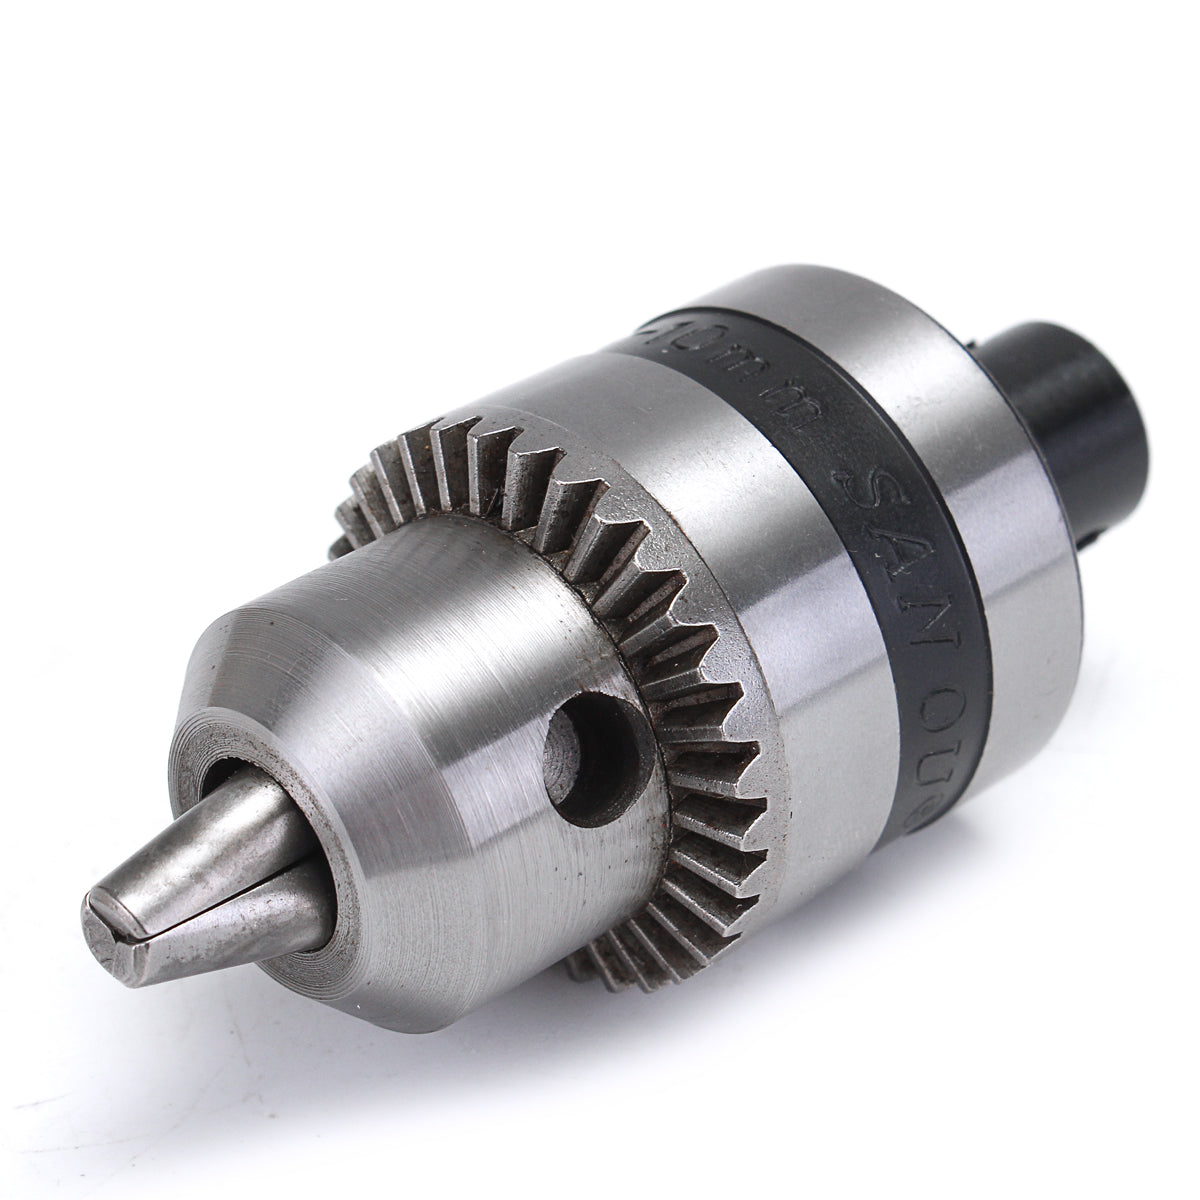 1.5-10mm Electric Drill Chuck with 5mm Steel Shaft Mount B12 Inner Hole Drill Chuck Adapter